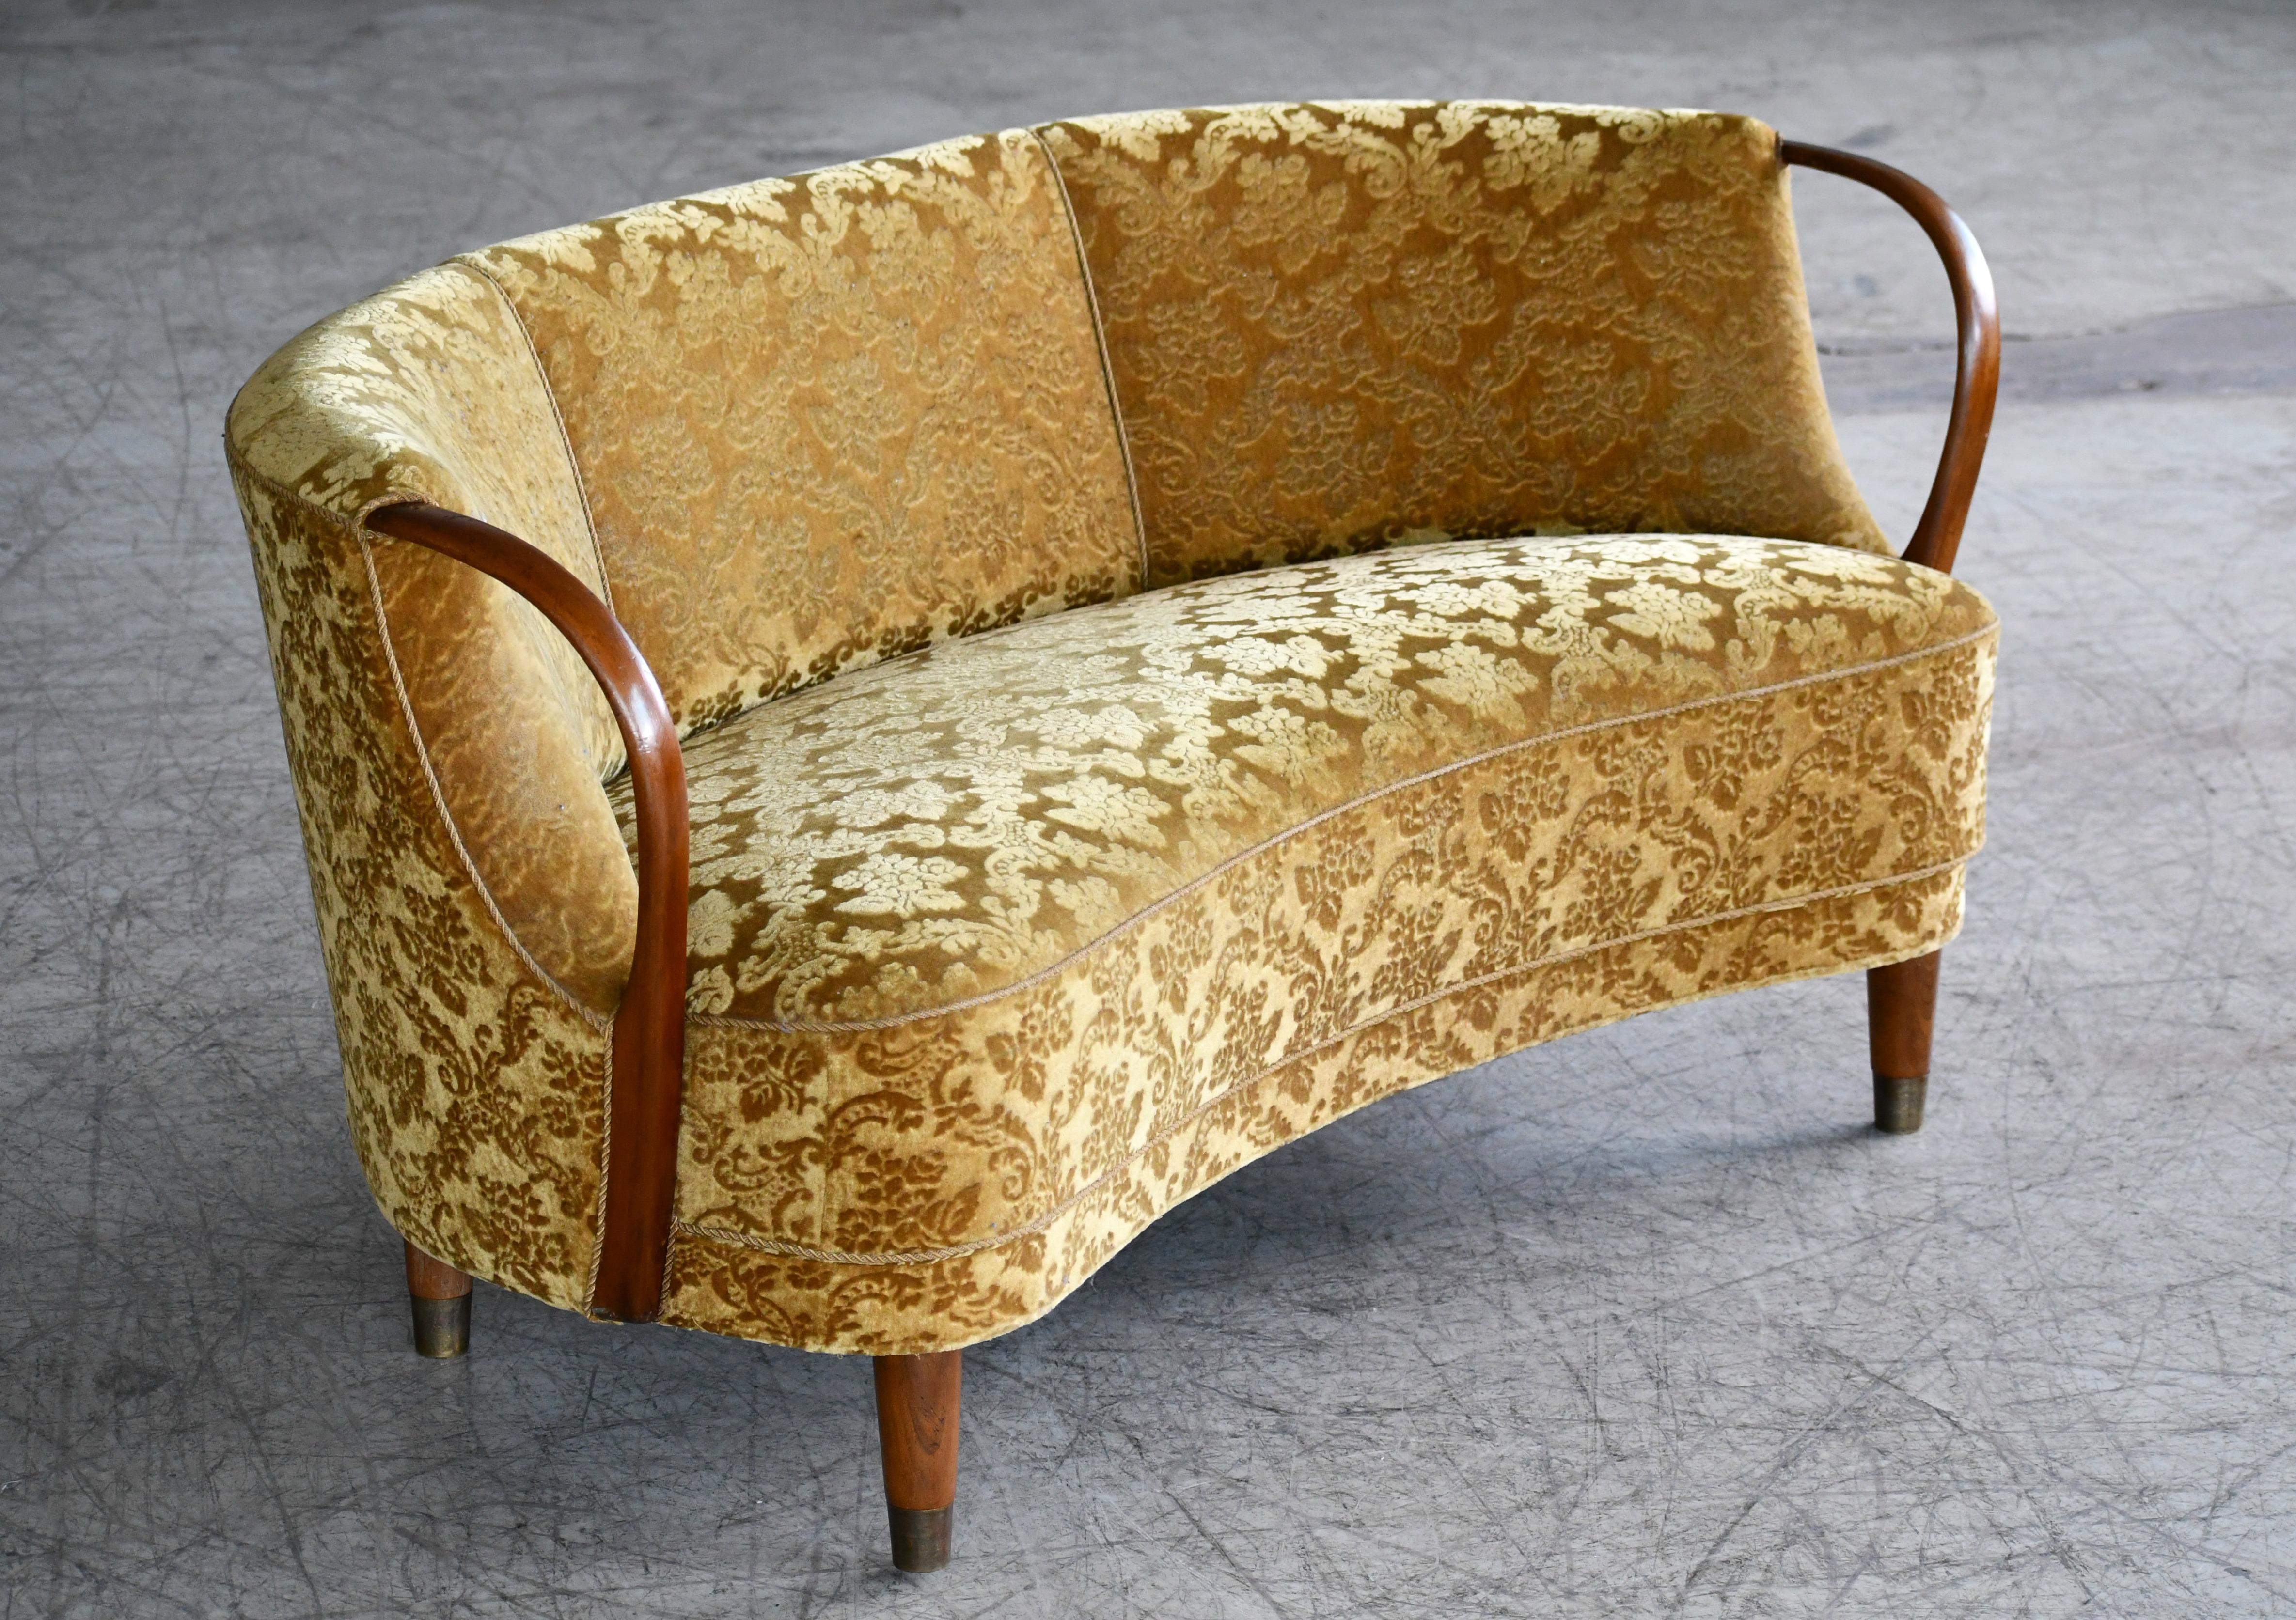 Unique and just superb curved or banana shaped loveseat or settee with open armrests designed and made as Model 96 by N.A. Jørgensens Møbelfabrik in 1954-1955. N.A. Jørgensen is better known under the name Bramin Møbler a name they adopted in the